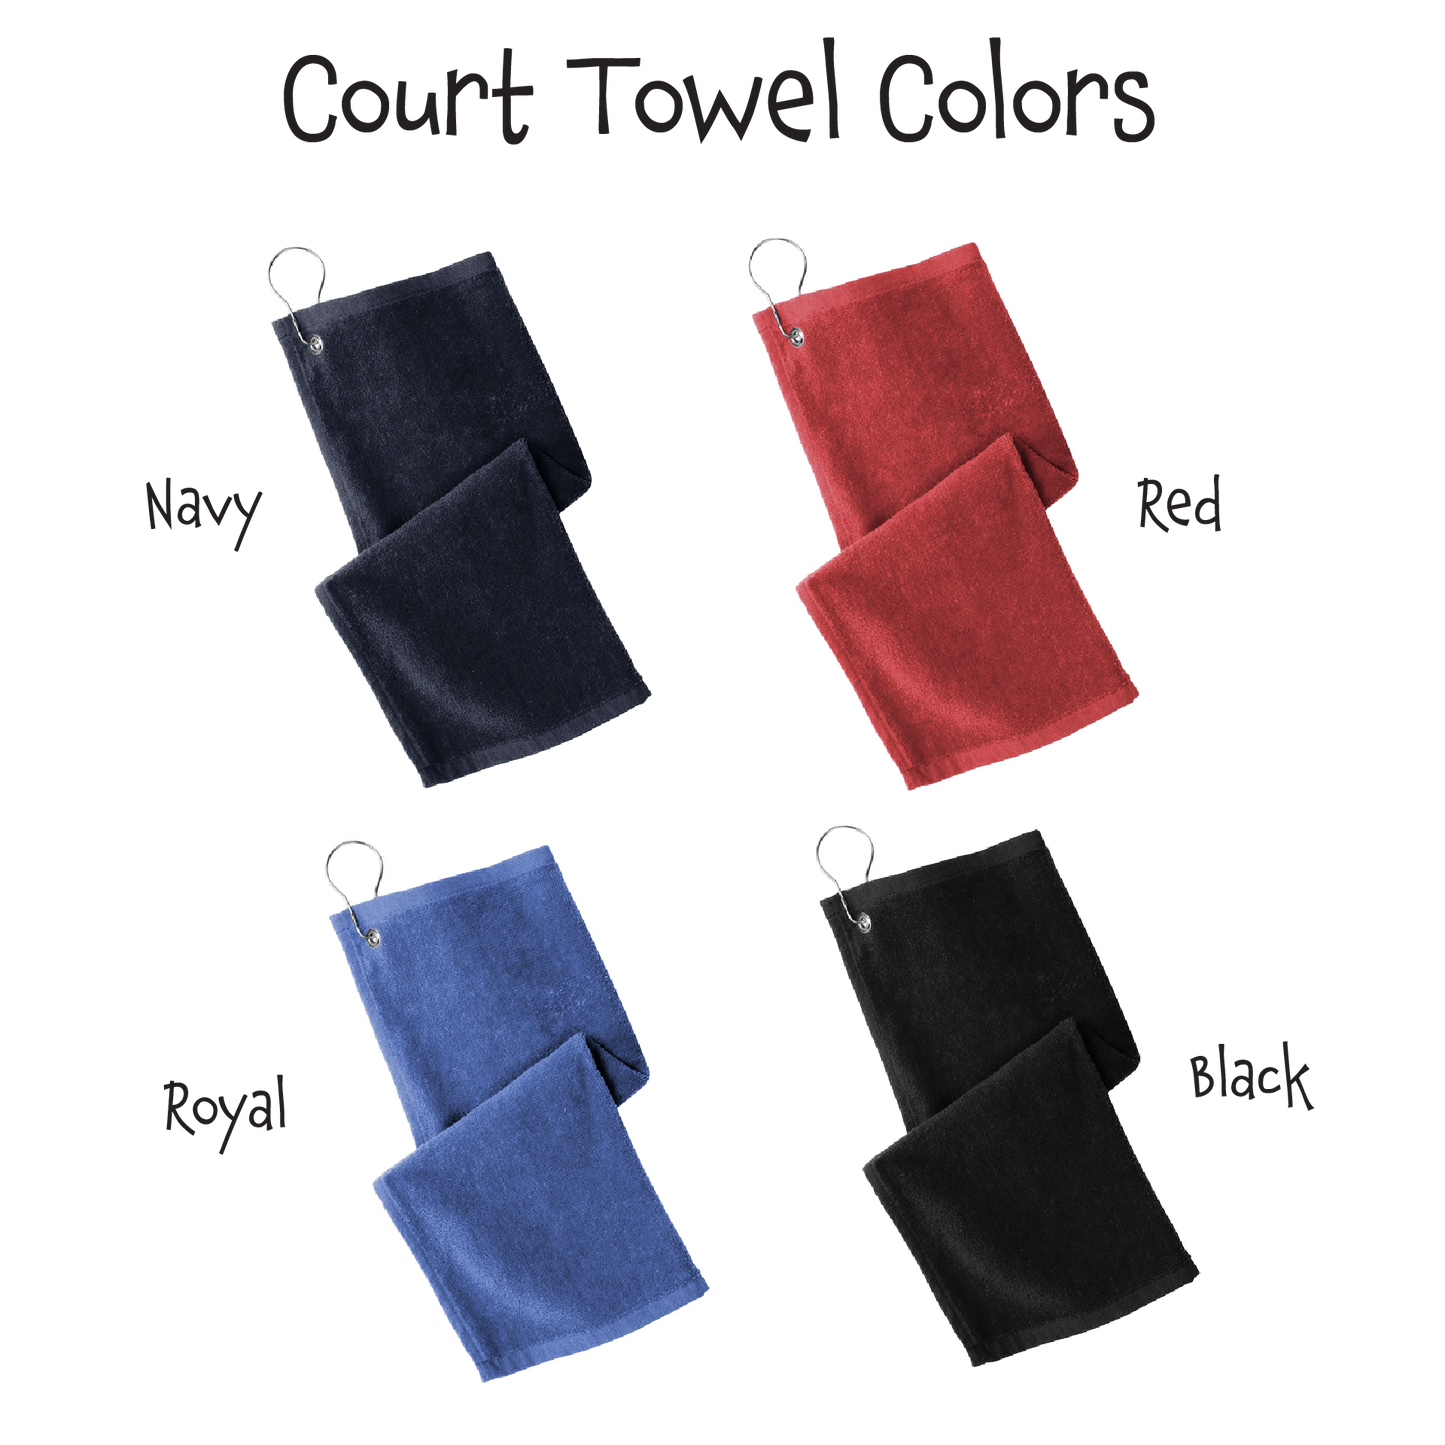 Pickleball Court with Ball | Pickleball Court Towels | Grommeted 100% Cotton Terry Velour